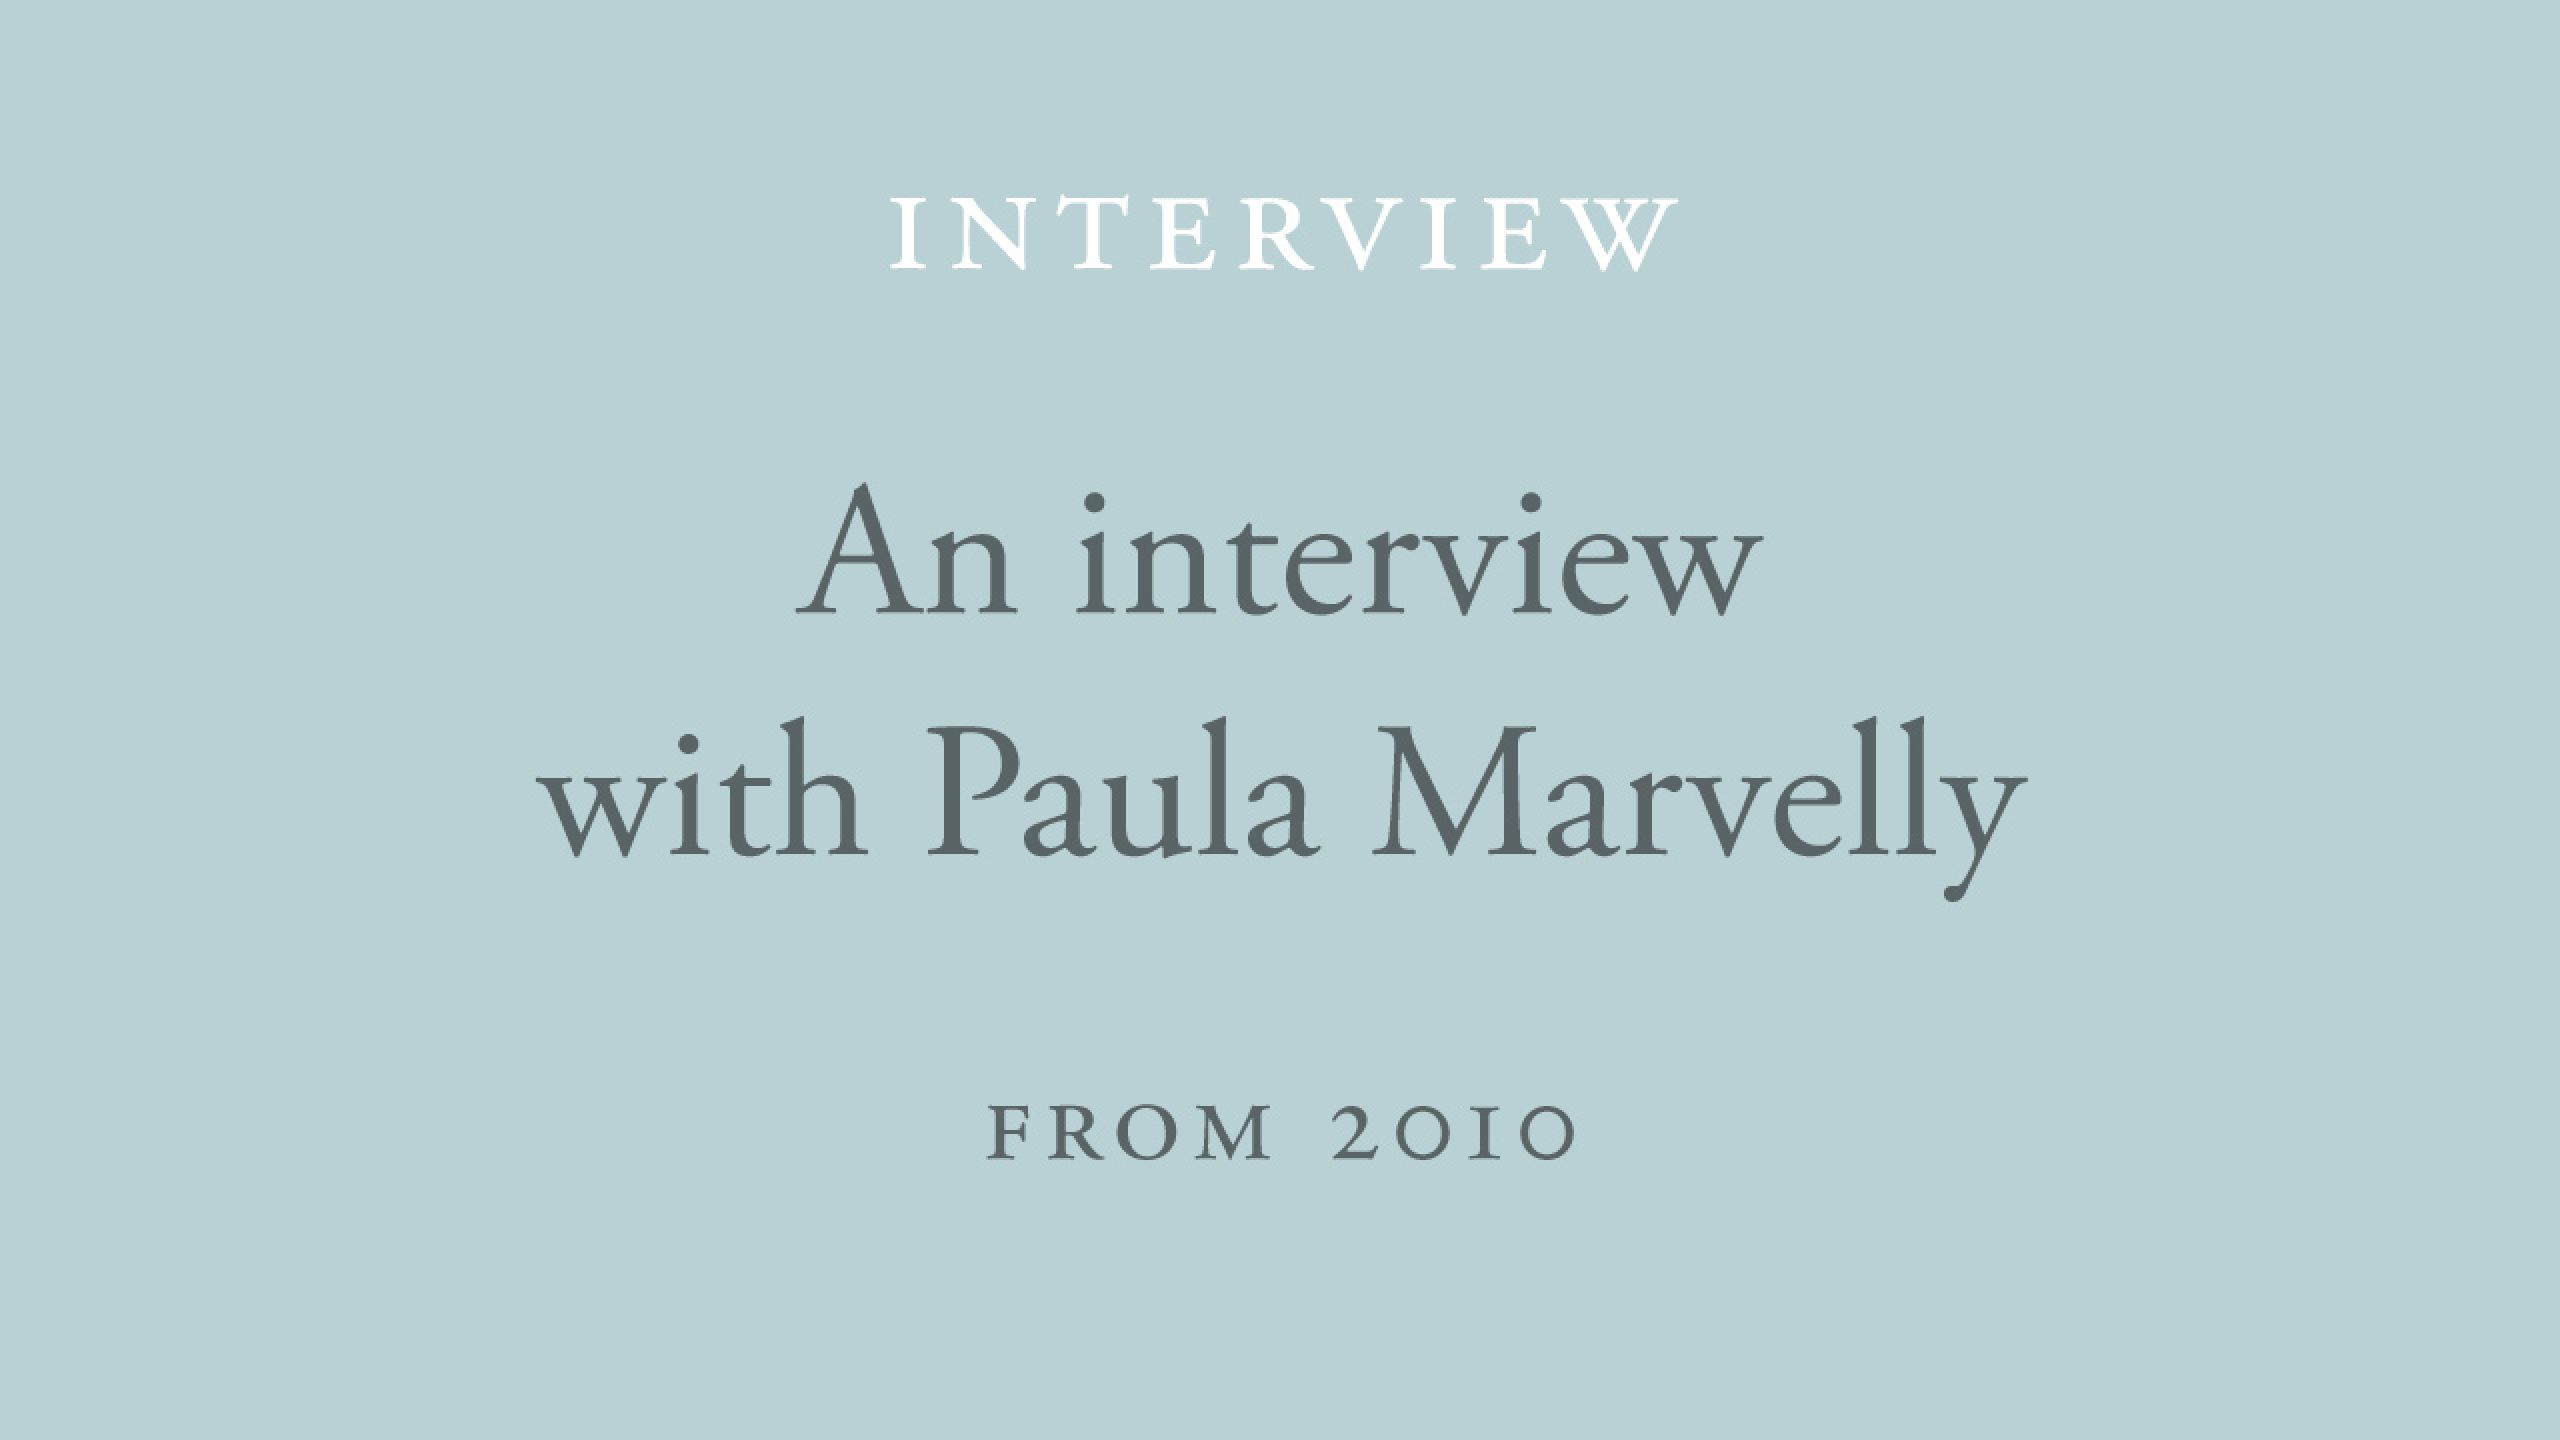 Interview with Paula Marvelly: Contemplating the Nature of Experience